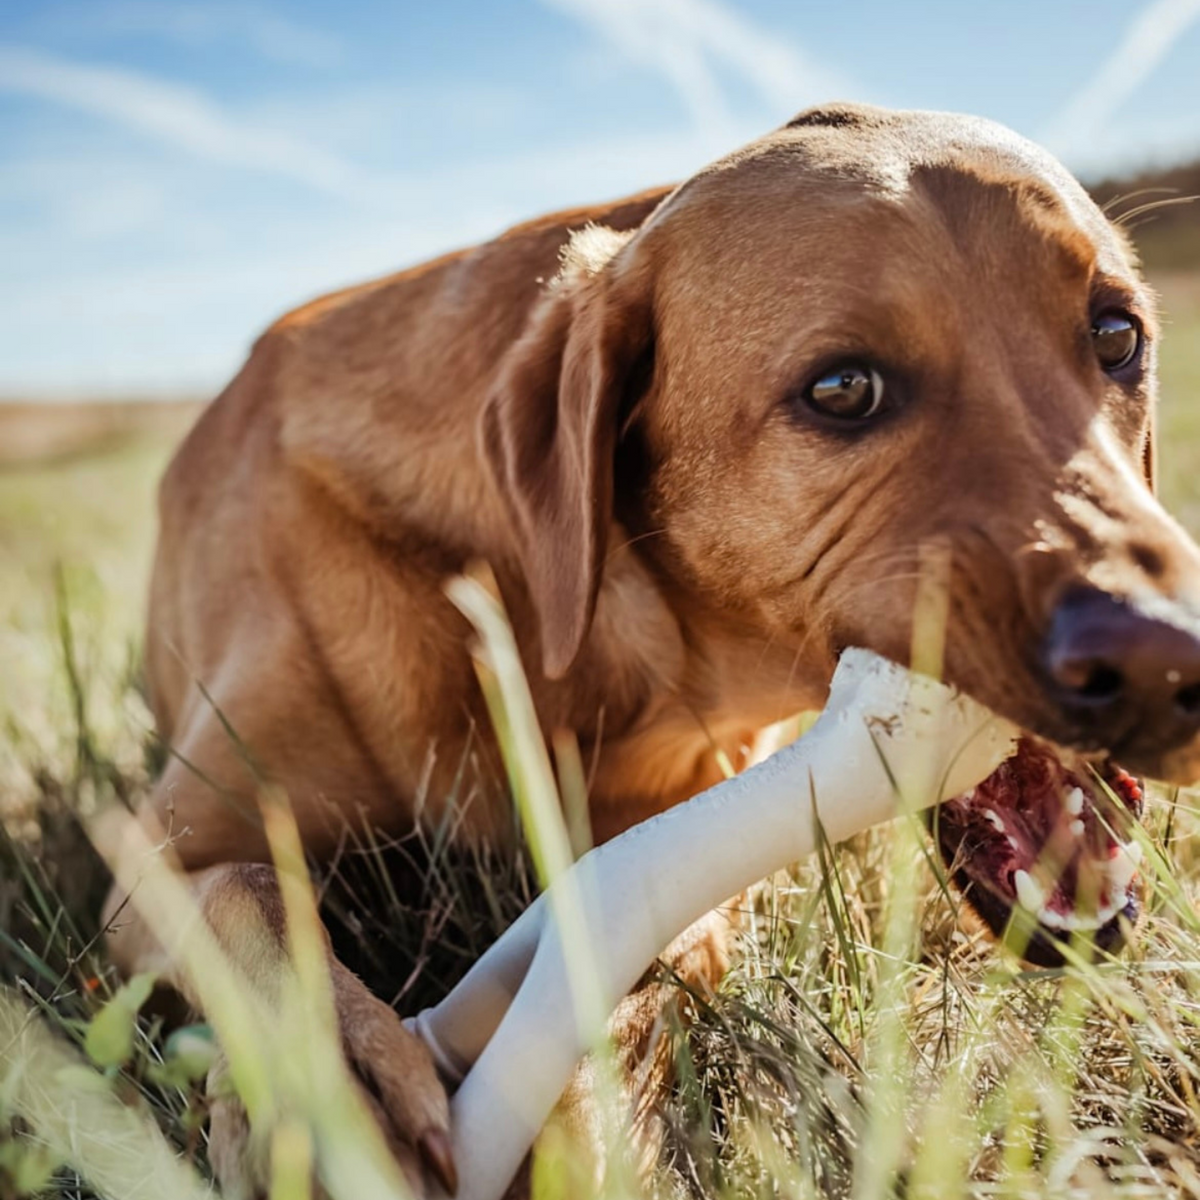 BetterBone Hard Density- Tough, SUPER Durable All-Natural, Dog Chews - For Aggressive Chewers.